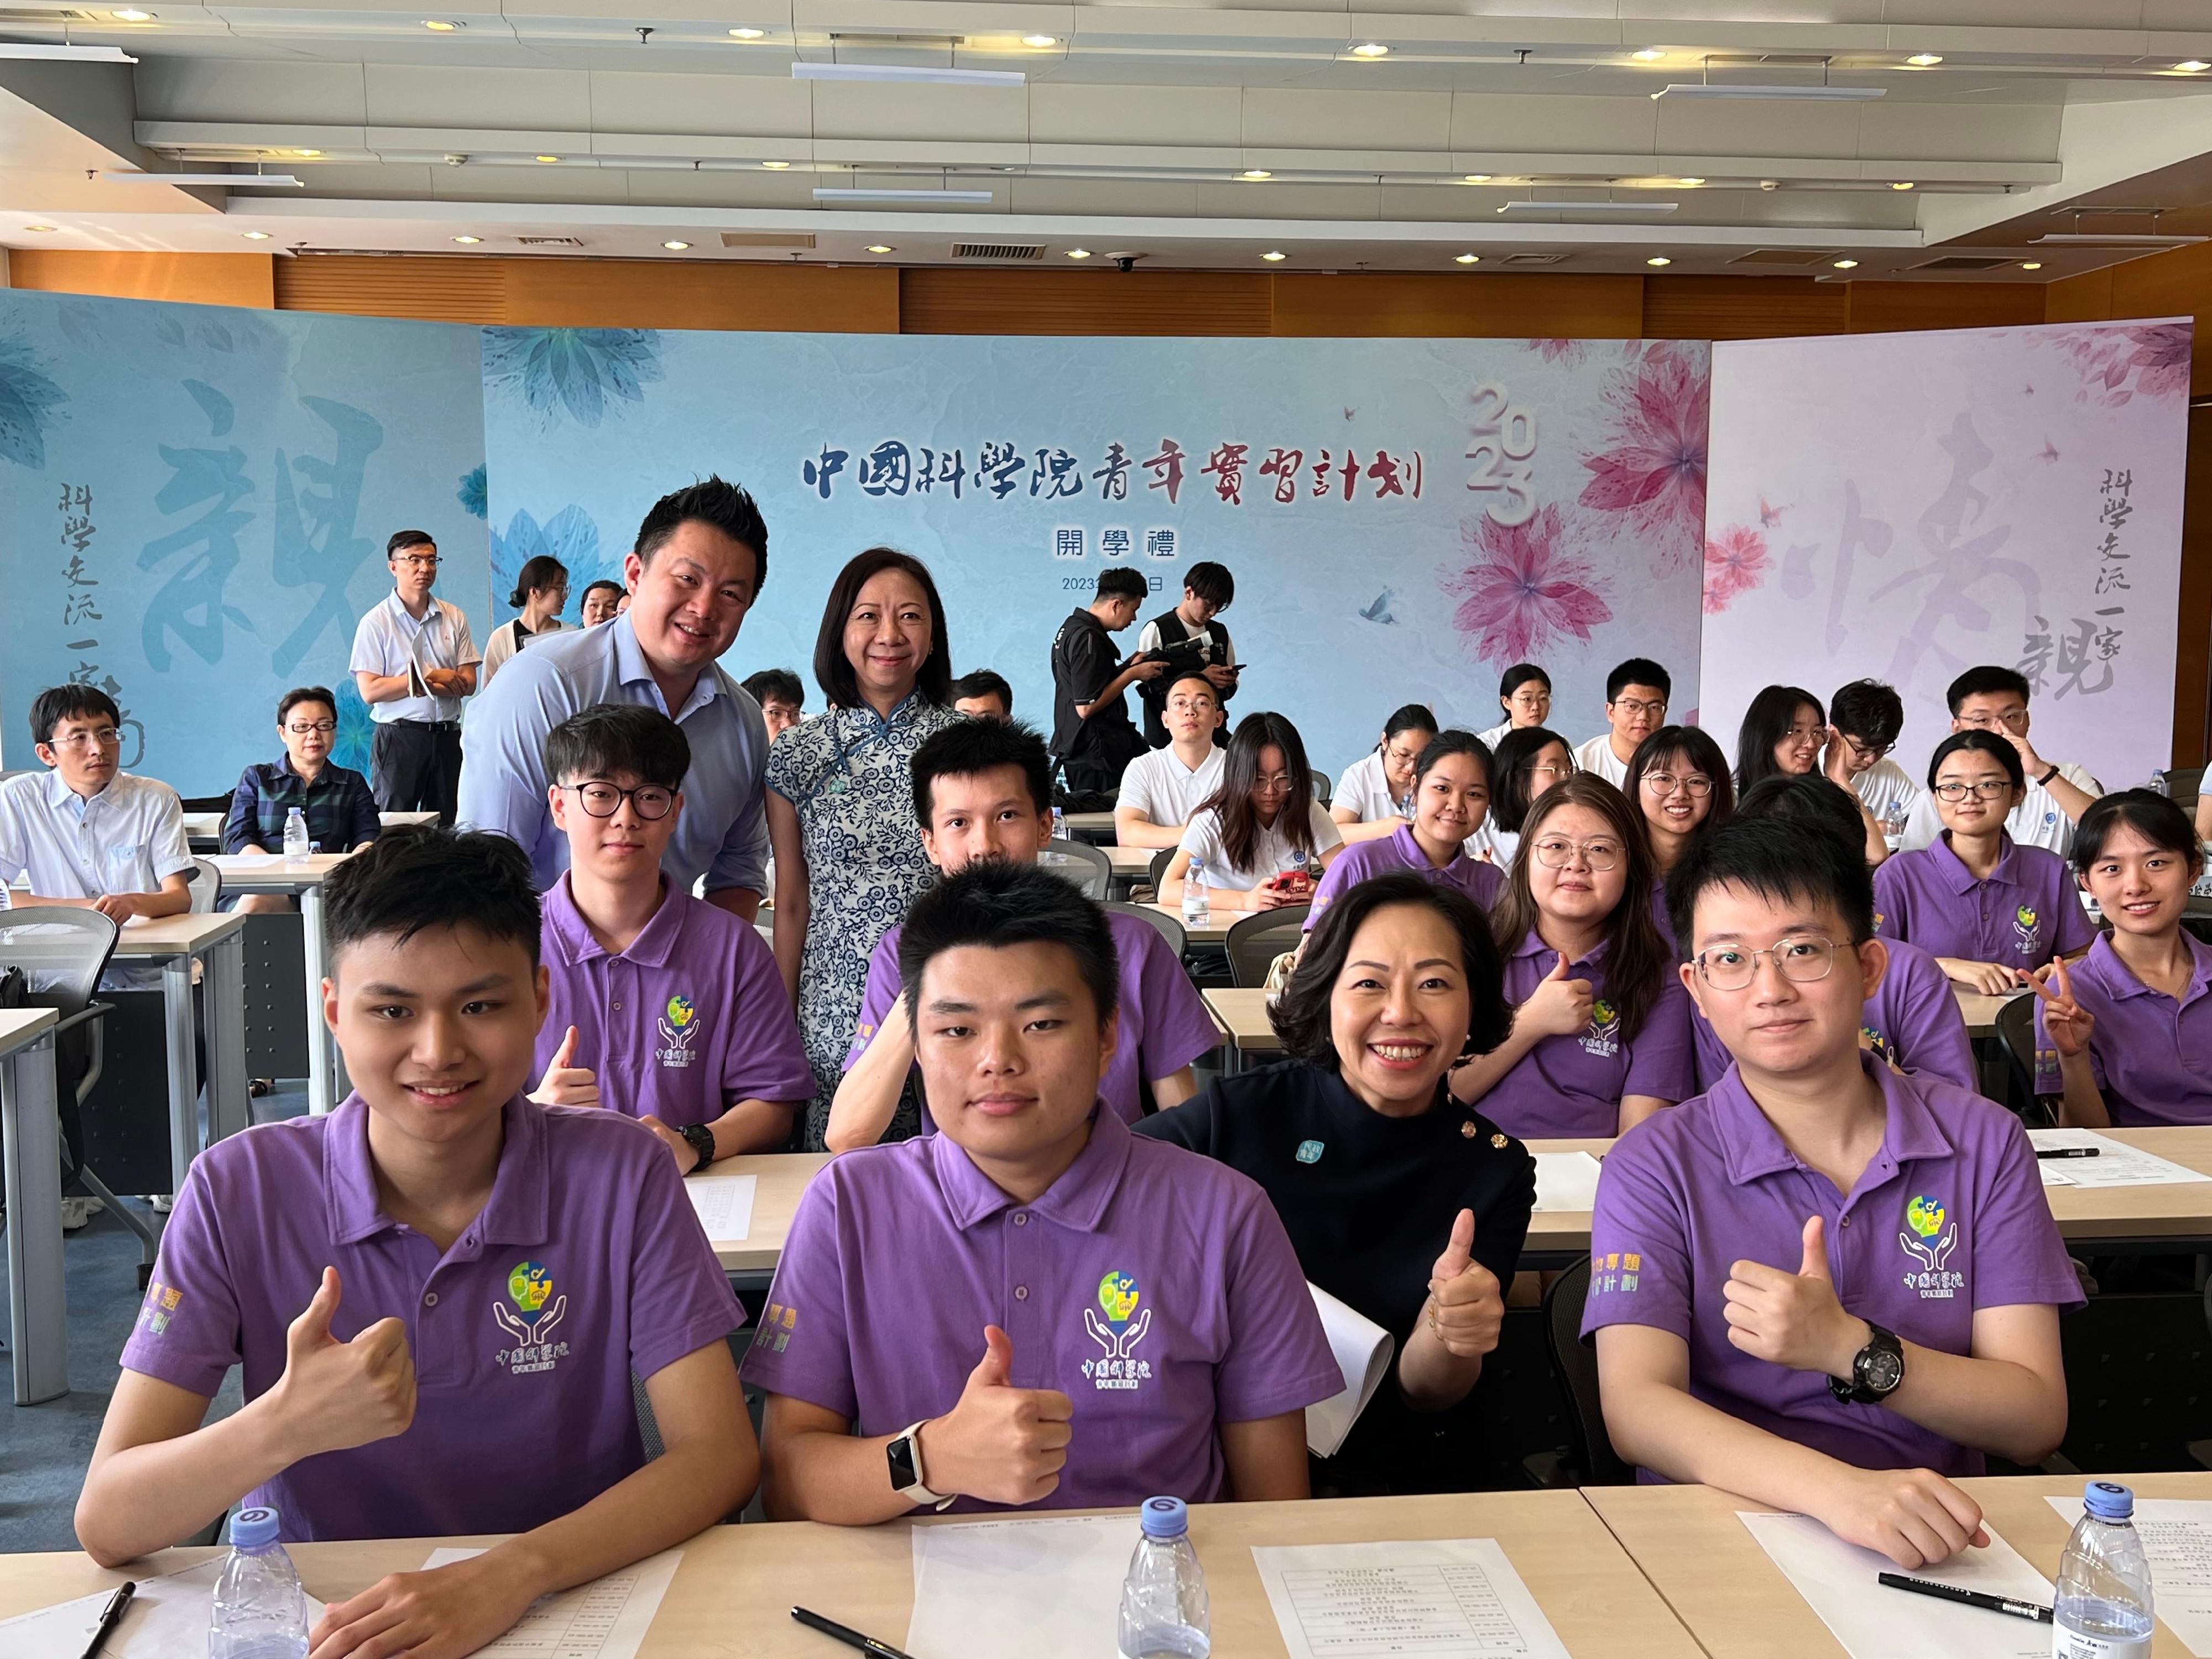 The Secretary for Home and Youth Affairs, Miss Alice Mak, continued her visit in Beijing today (July 18). She attended the inauguration ceremony of the Youth Internship Programme at Chinese Academy of Sciences to show support for Hong Kong youths who will soon start their internship at the Chinese Academy of Sciences.
Photo shows Miss Mak (first row, third left); the Permanent Secretary for Home and Youth Affairs, Ms Shirley Lam (third row, second left); the Vice-Chairman of the Youth Development Commission, Mr Kenneth Leung (first row, second left), and the interns.